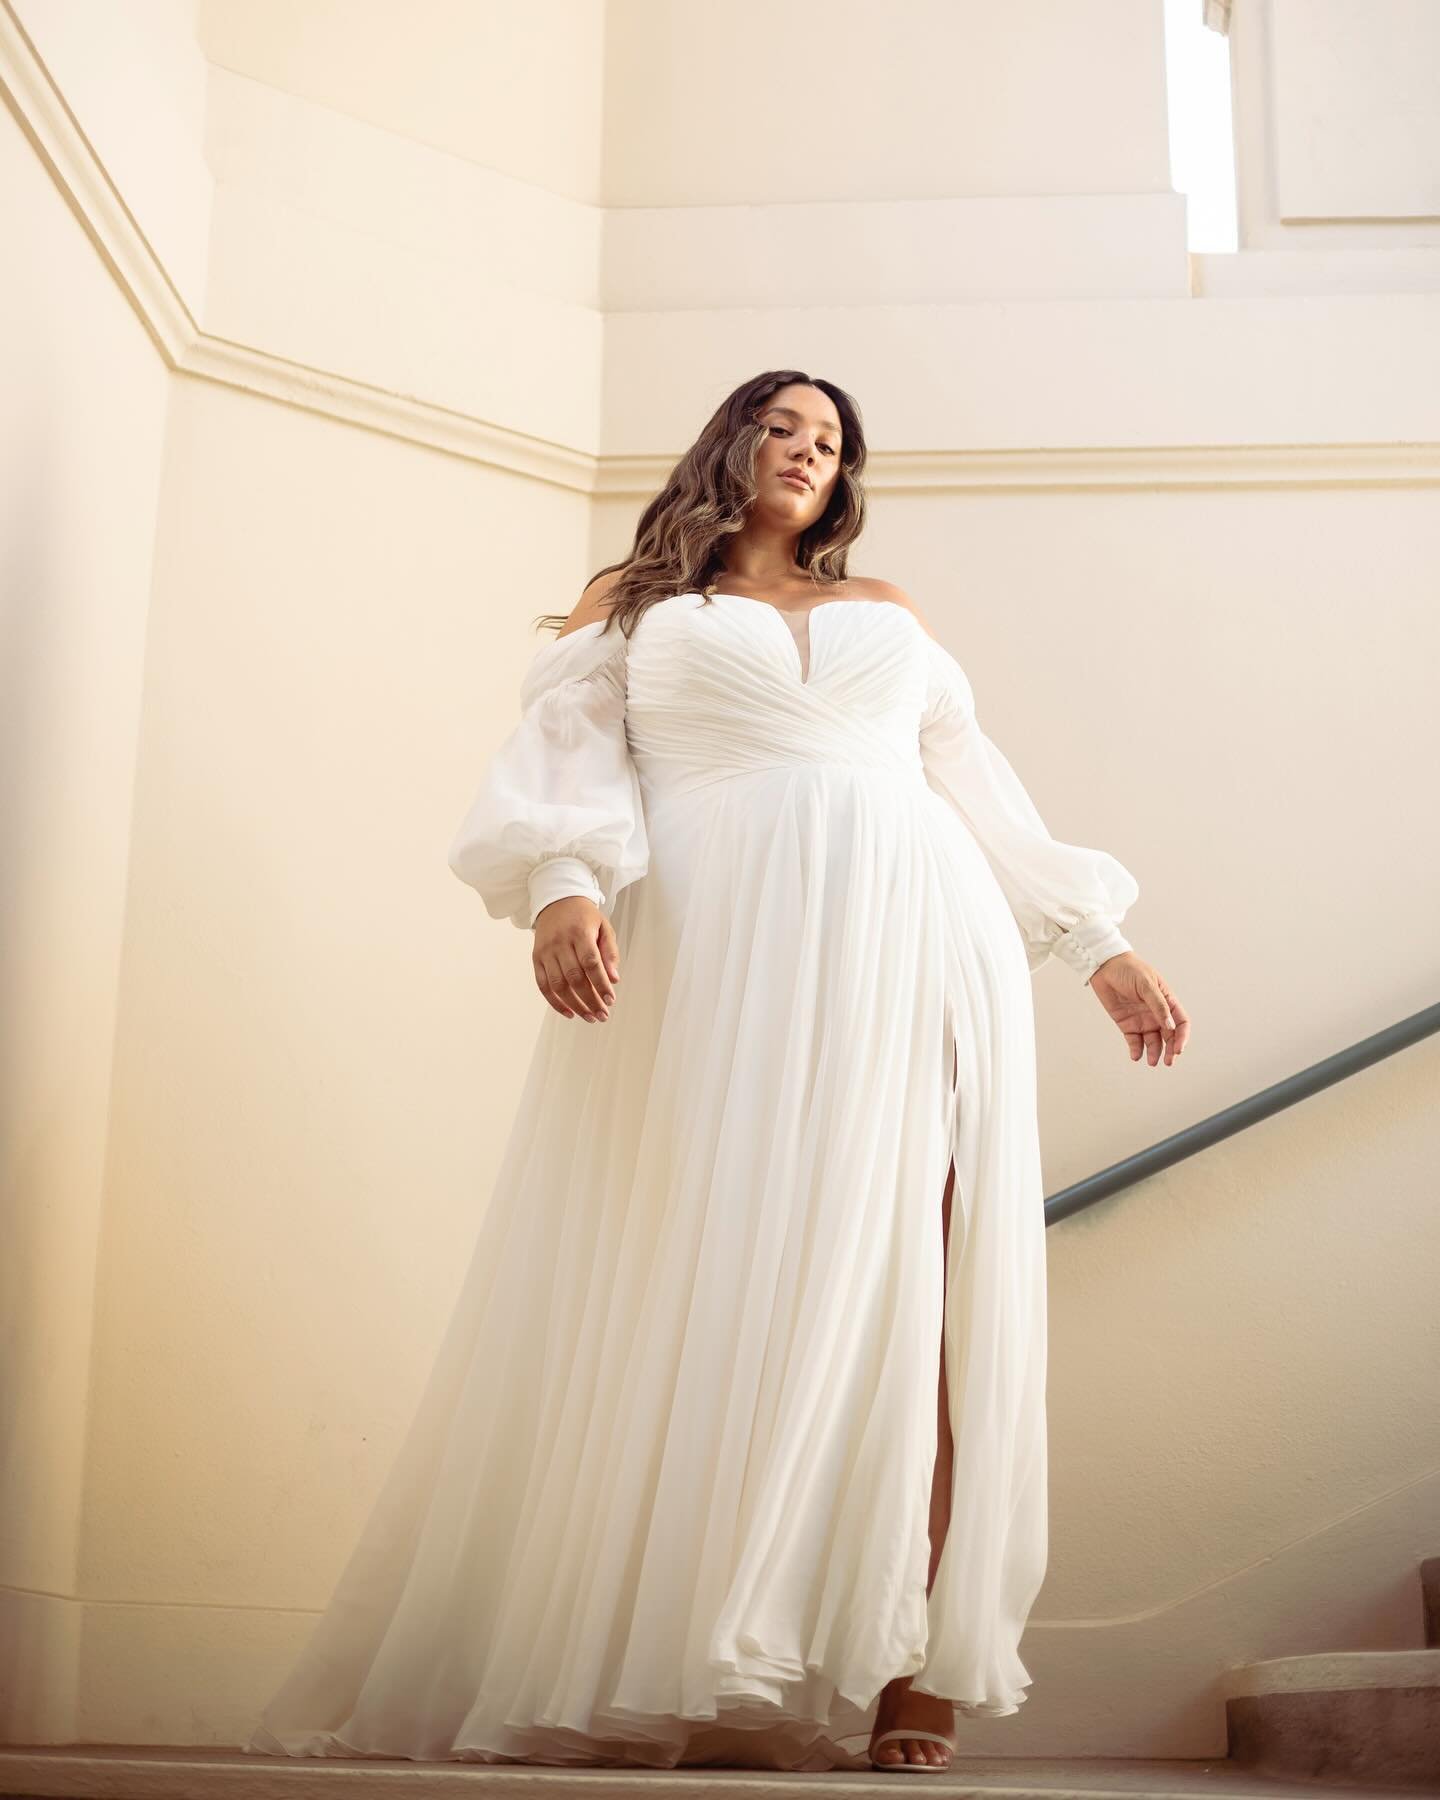 Bateau Bridal Boutique is proud to be a size inclusive boutique! Our sample gowns range from size 8-28 and most gowns can be ordered up to a size 34! 

#alaskabridalshop #alaskabride #plussizebride #everybodyeverybride #sizeinclusivebridal